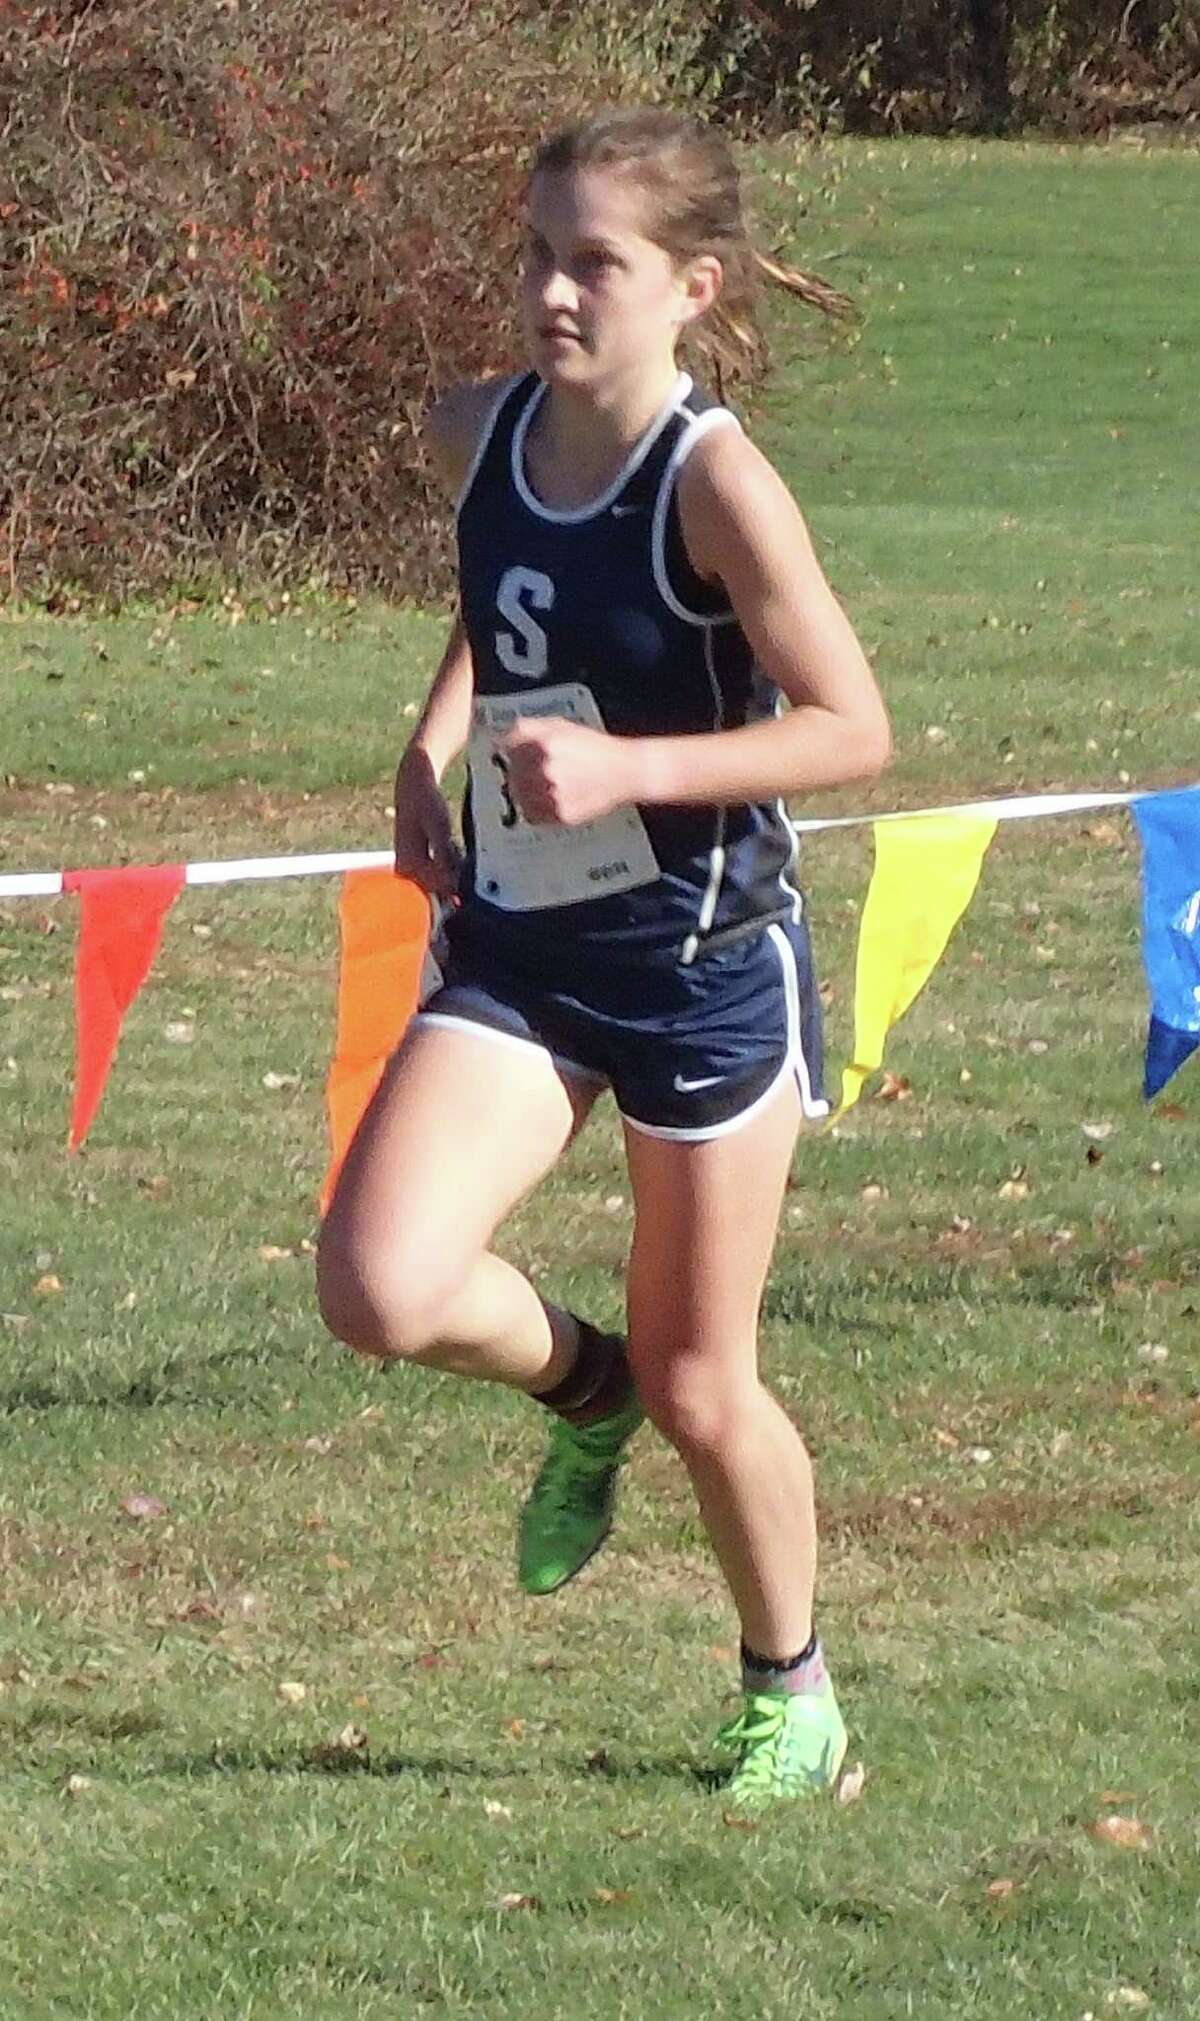 Staples High School senior Hannah DeBalsi won her third straight Class LL state cross country championship with a time of 18:14 at Wickham Park in Manchester on Oct. 31, 2015.